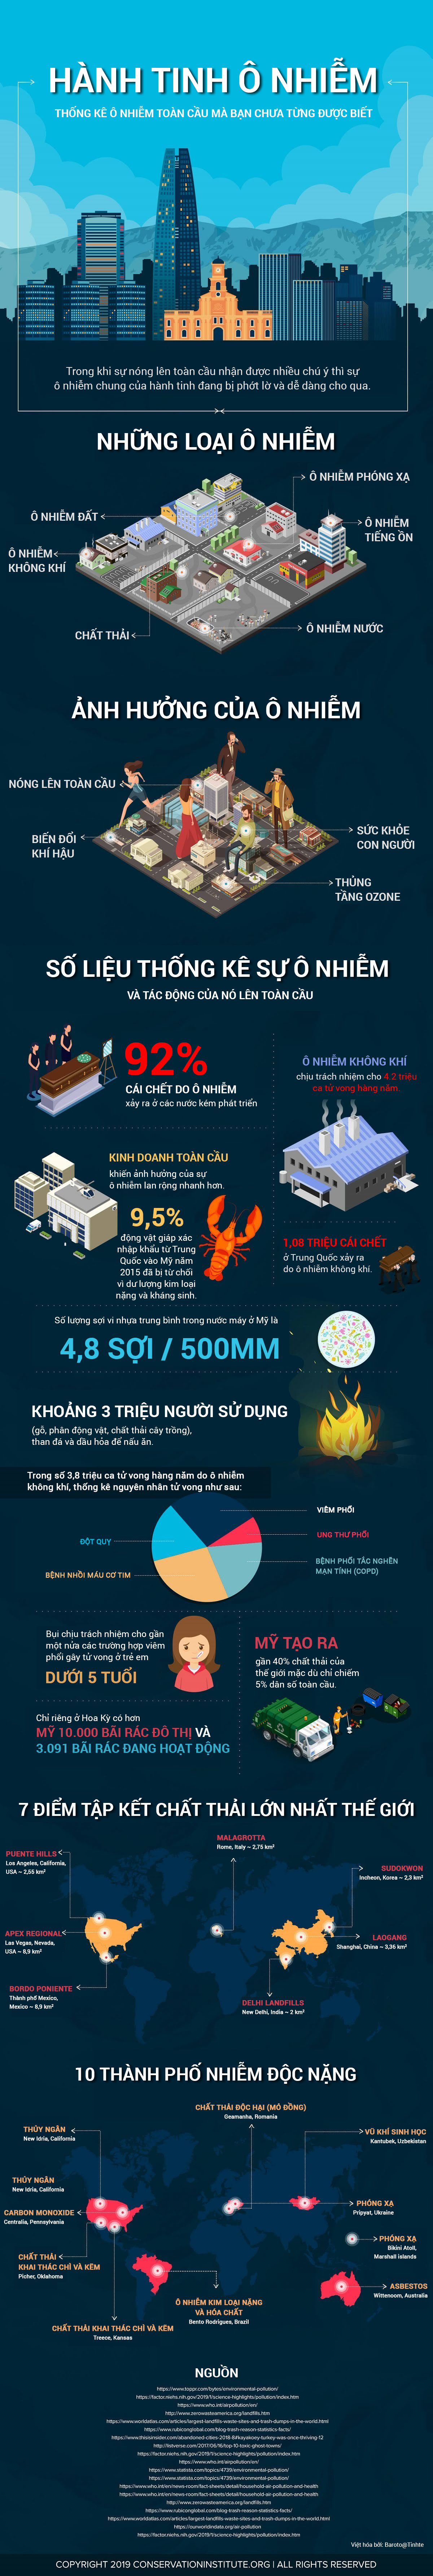 pollution-plant-global-pollution-stats-you-never-knew-infographic.png